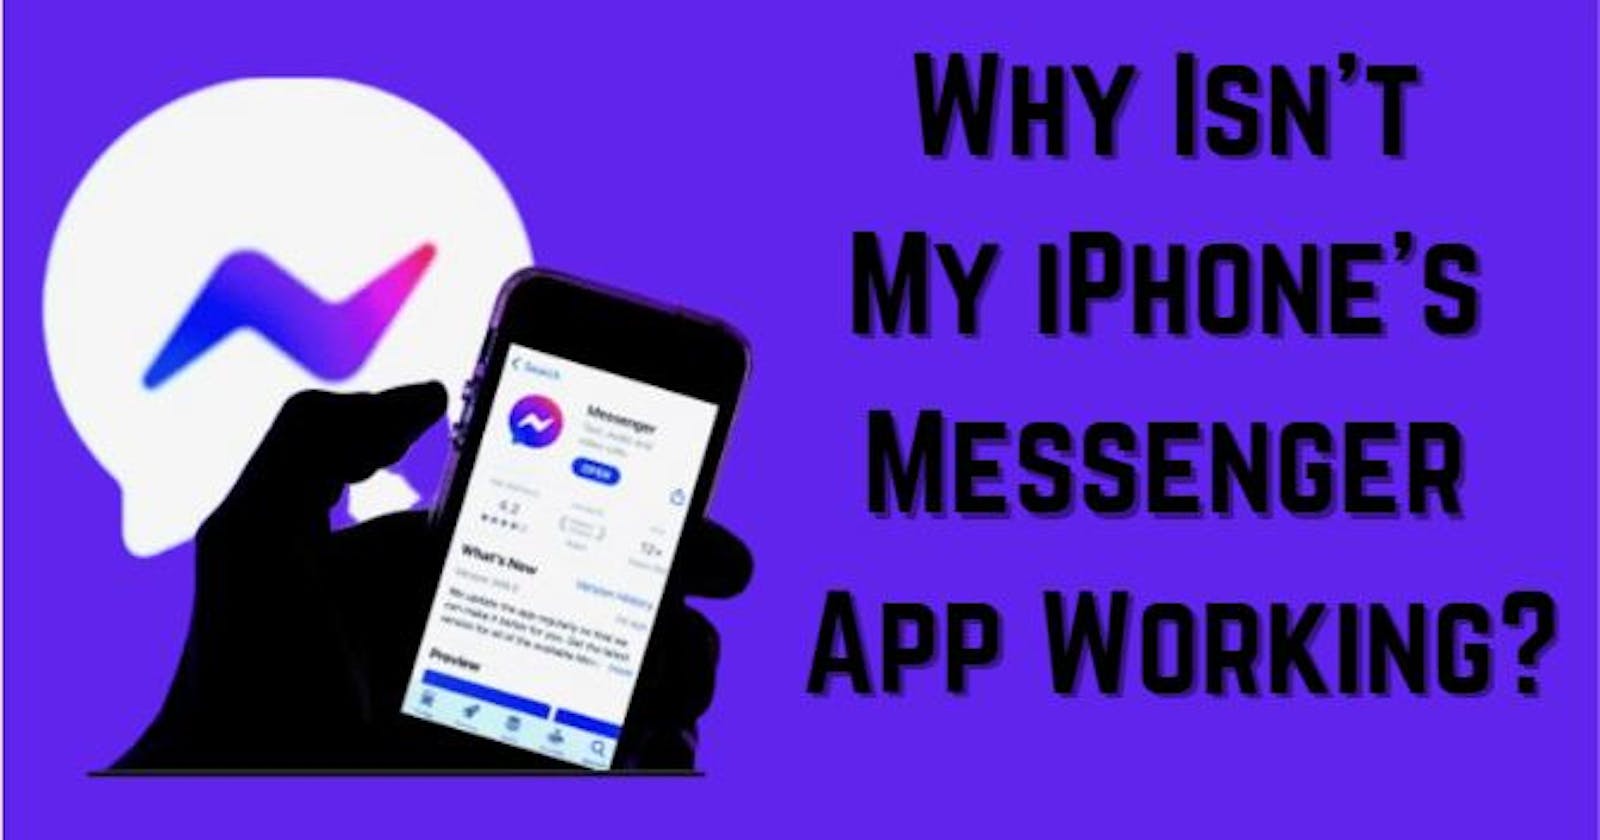 Why Isn't My iPhone's Messenger App Working?